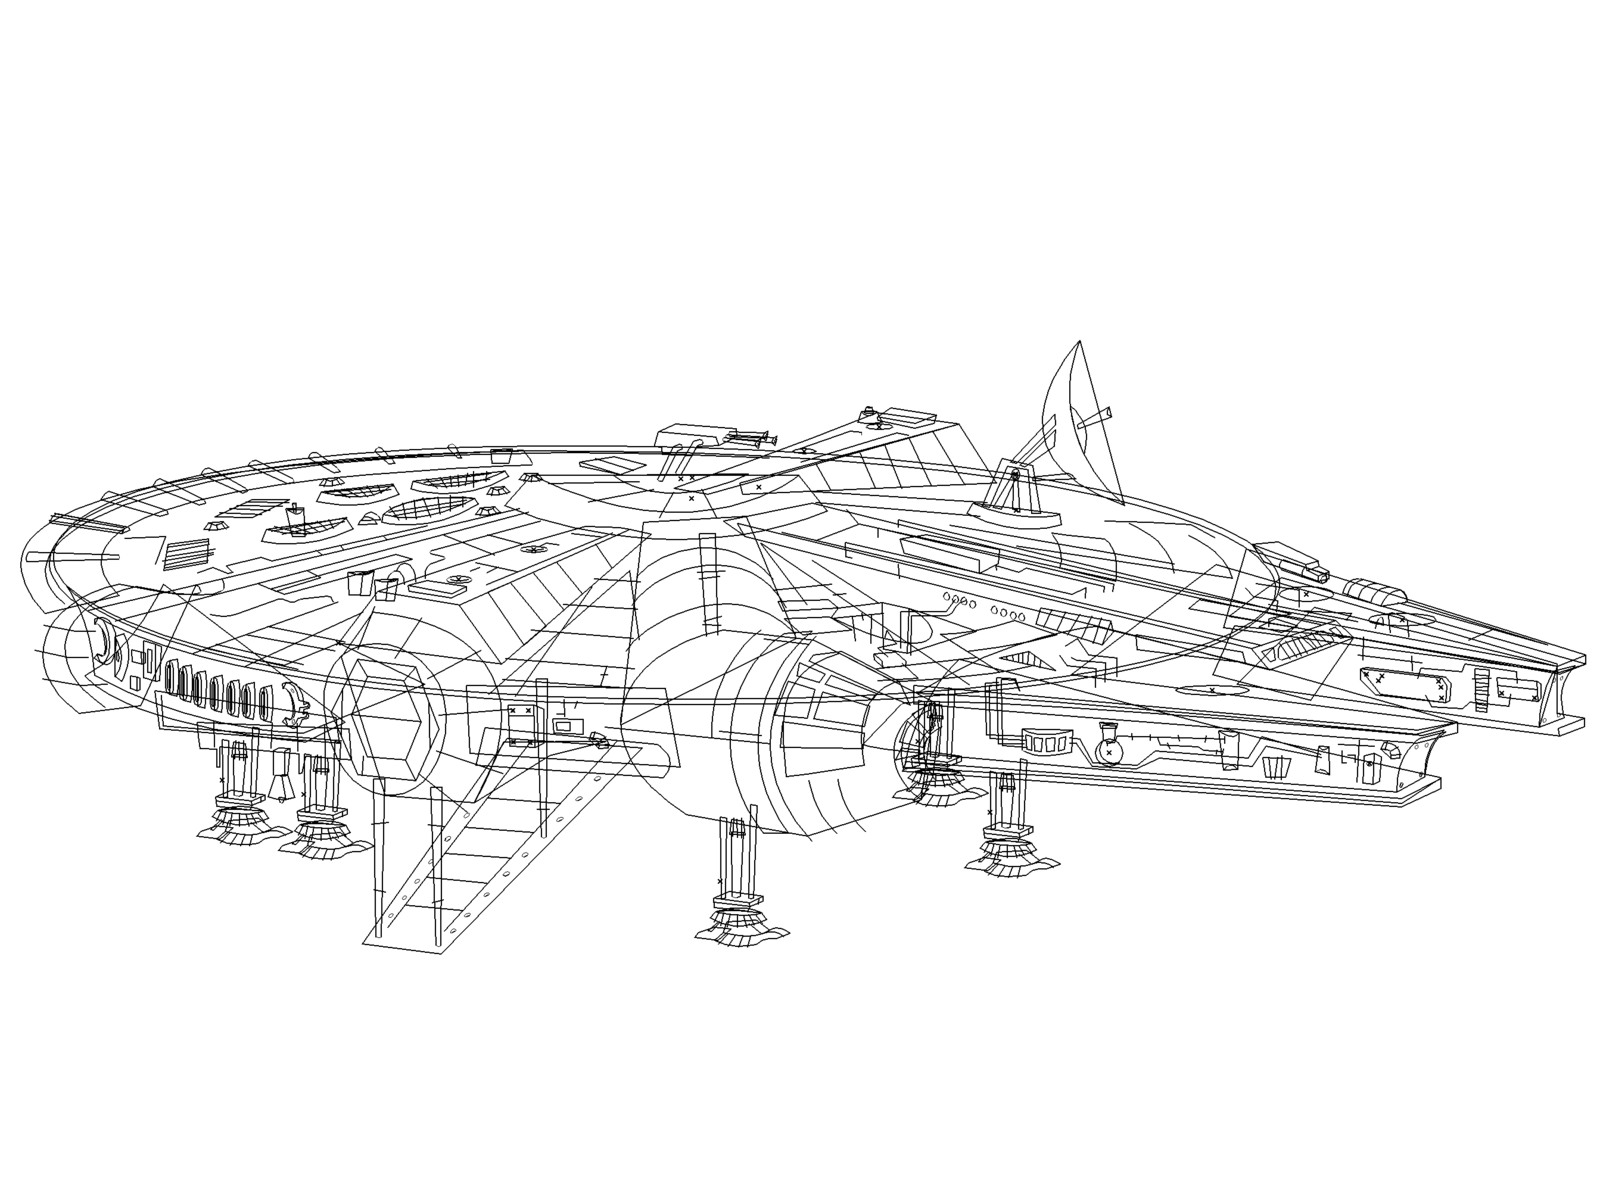 Millenium Falcon by Jetpacks and Rollerskates on Dribbble